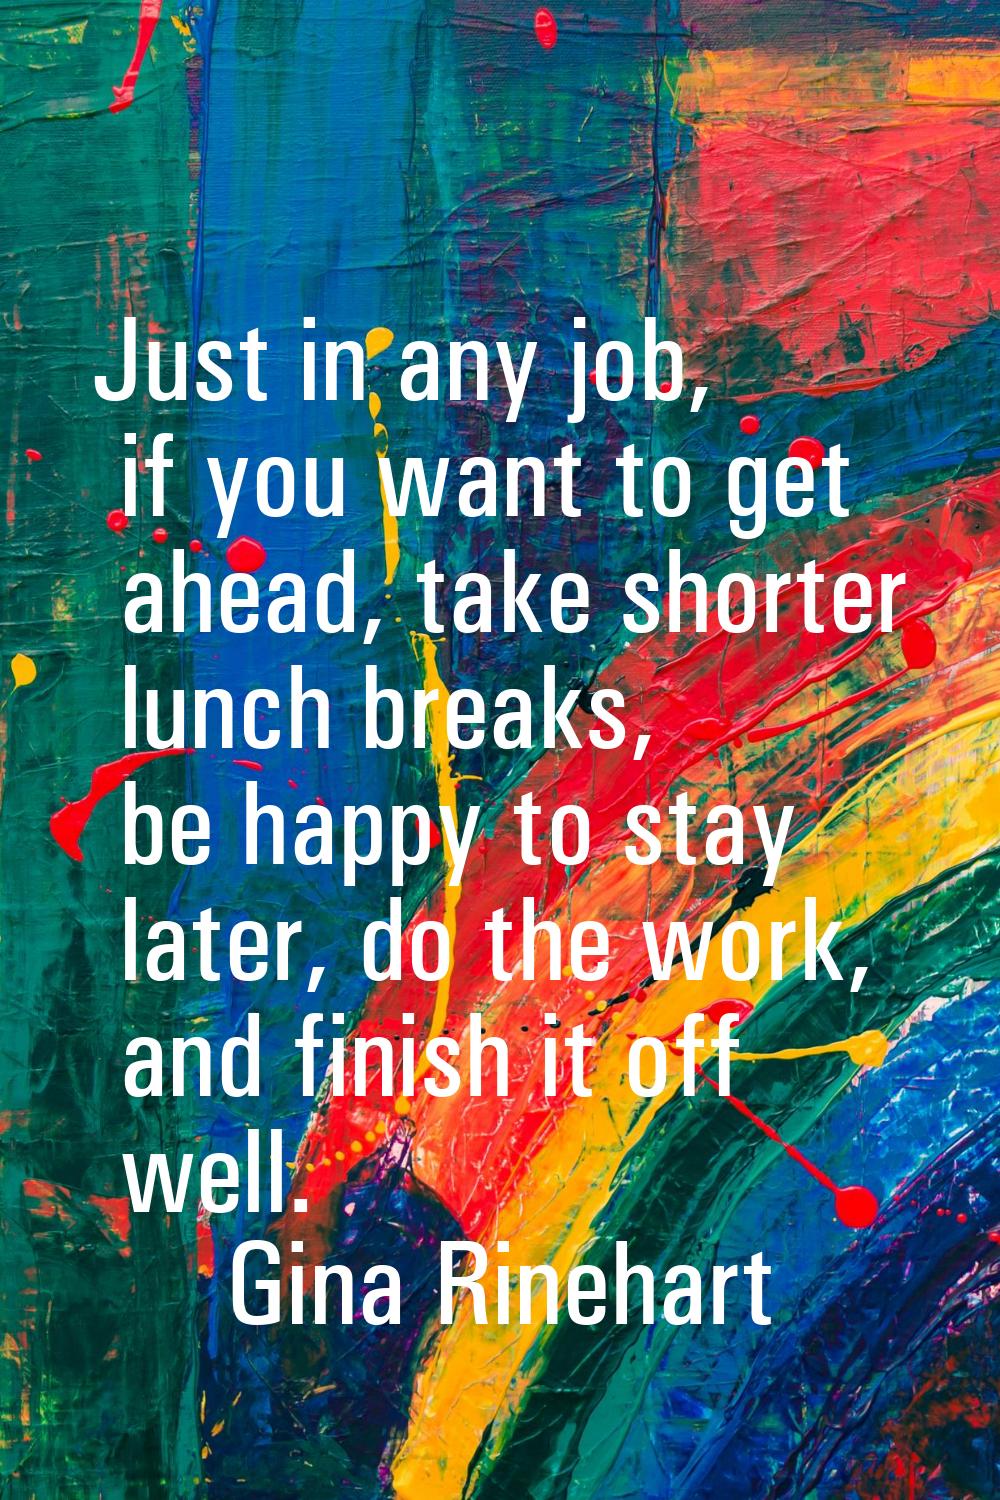 Just in any job, if you want to get ahead, take shorter lunch breaks, be happy to stay later, do th